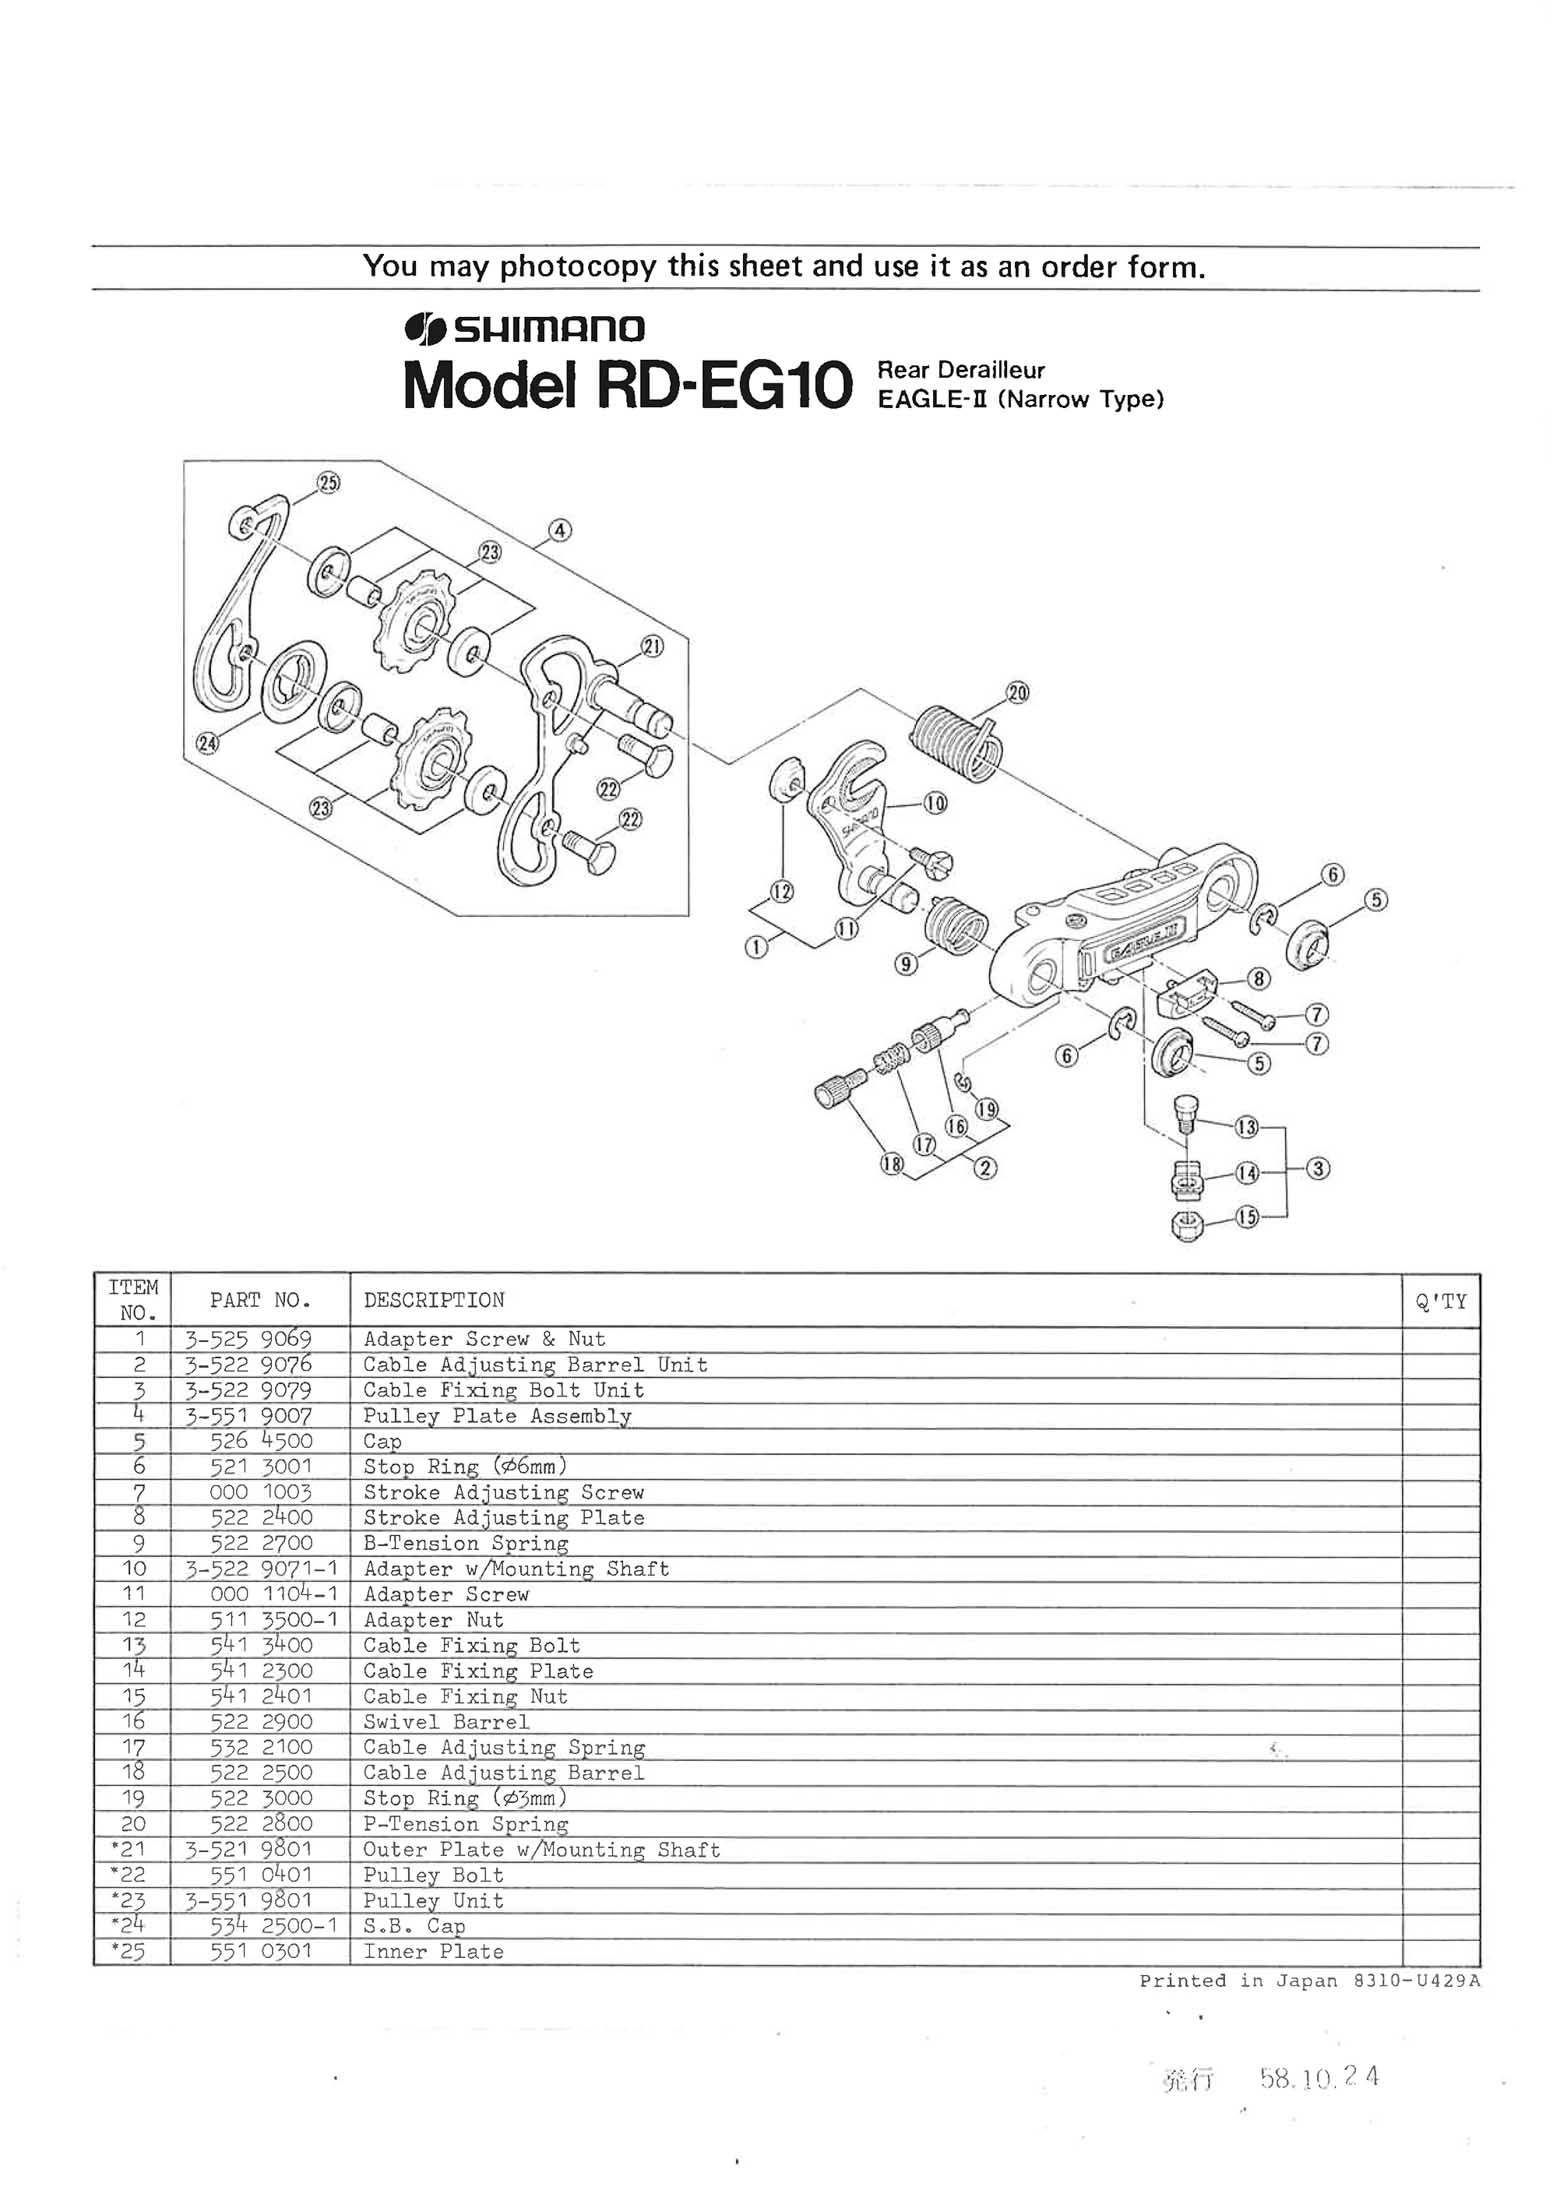 Shimano web site 2020 - exploded views from 1983 Eagle II (EG10) main image